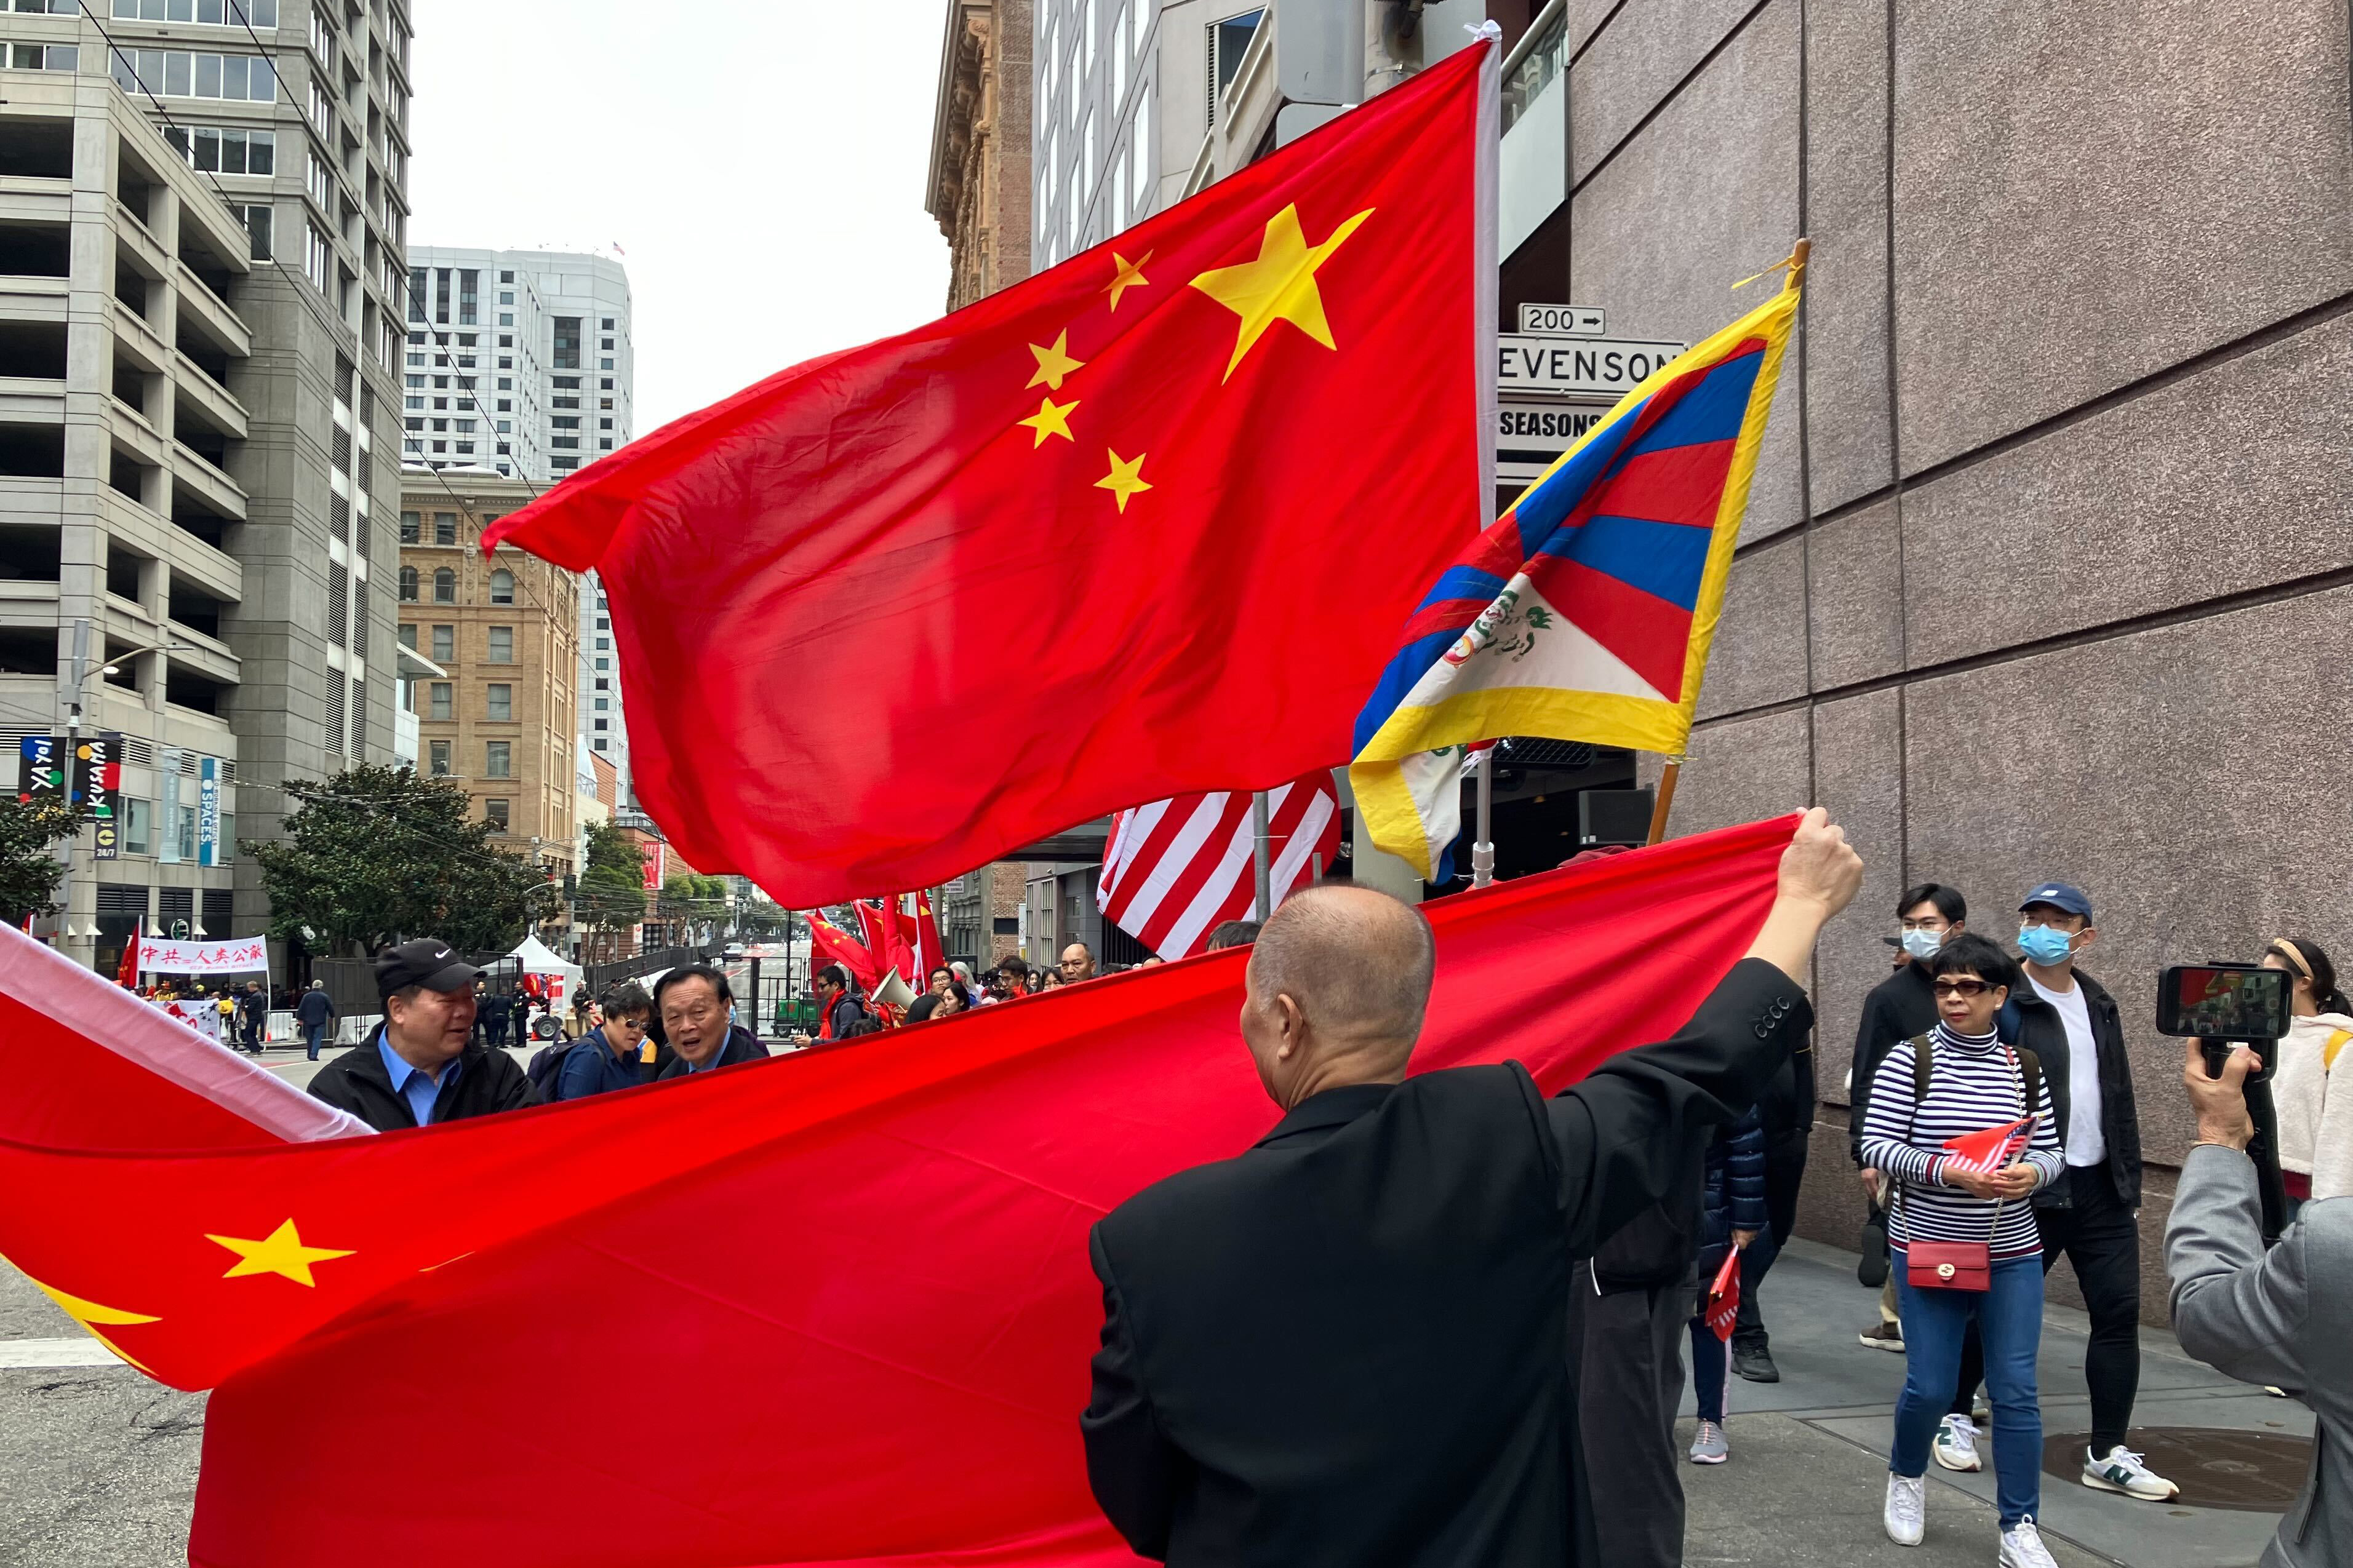 A man stretches a large, red, Chinese flag around a Tibetan flag on a city sidewalk as pedestrian pass.